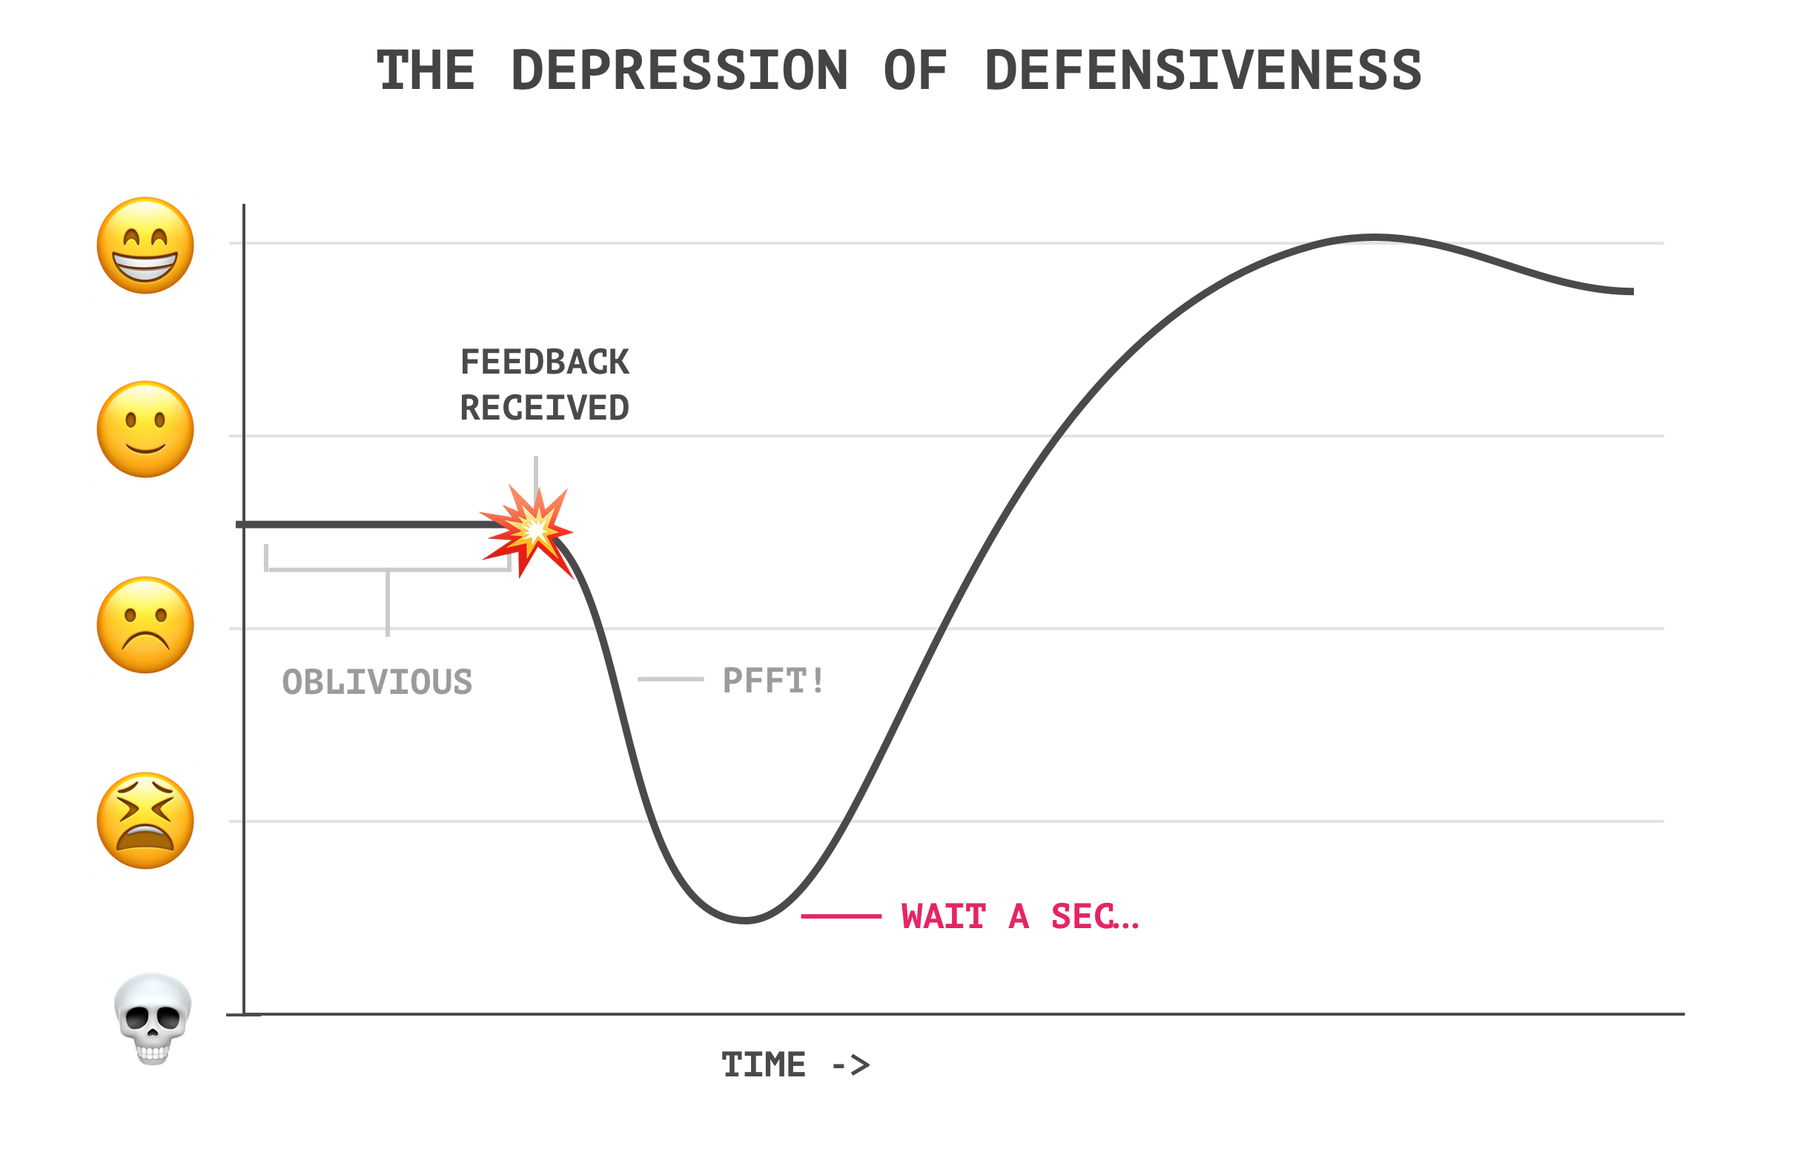 THE DEPRESSION OF DEFENSIVENESS chart with the bottom of a drop labelled ‘Wait a sec...’